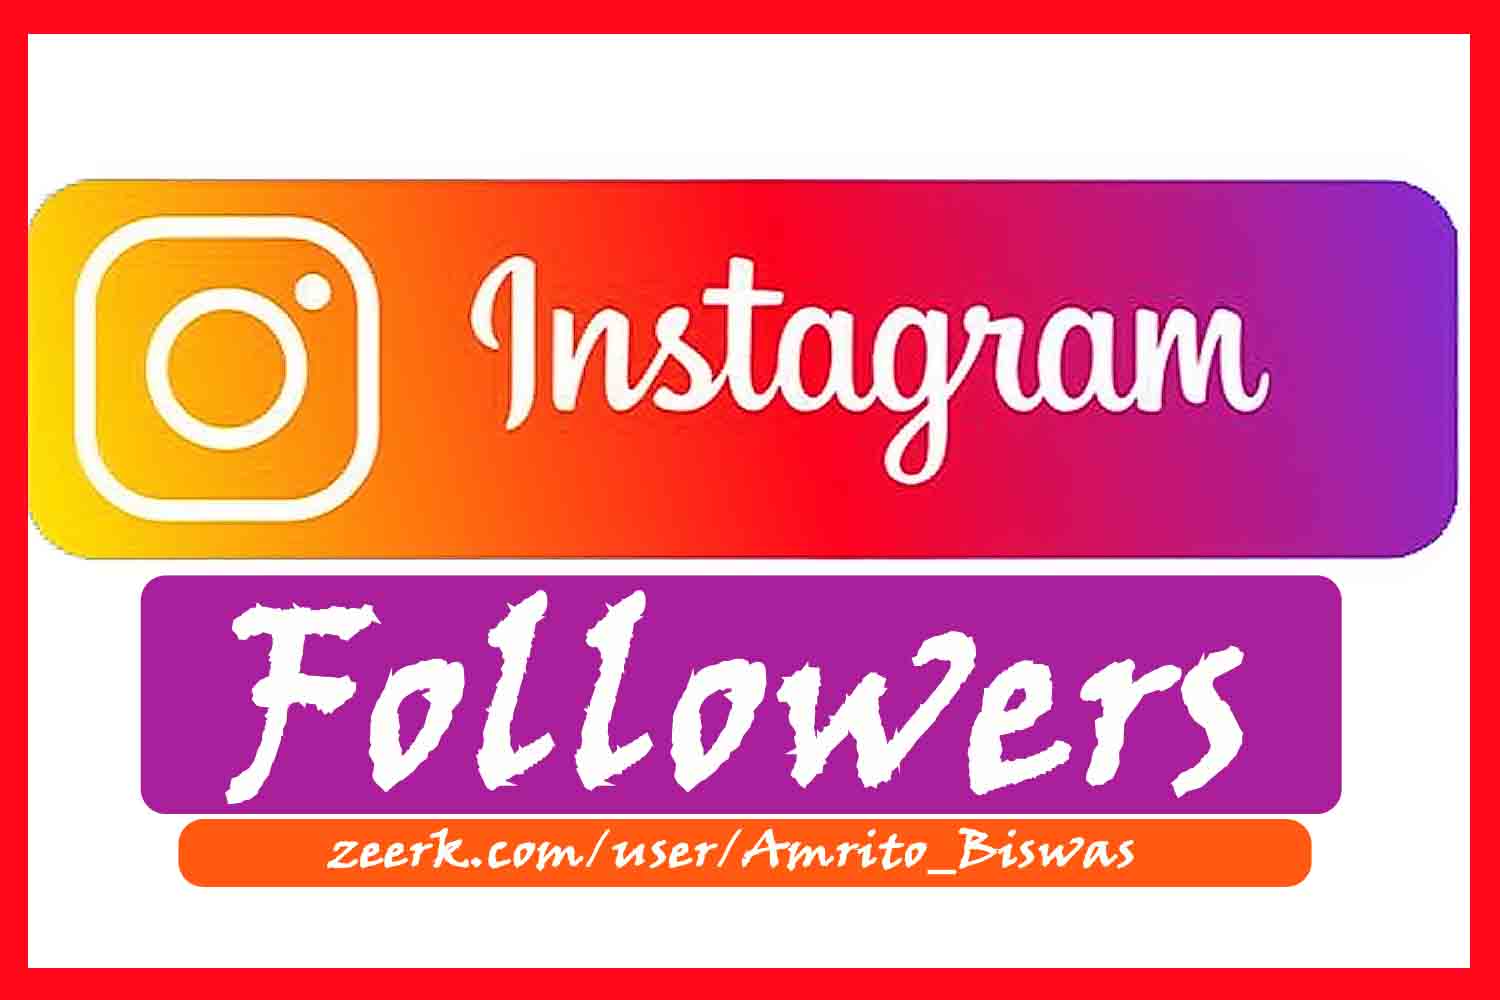 You Will get 2,000+ Instagram Real Followers, All Active User, None Dropped,100% Guarantee.